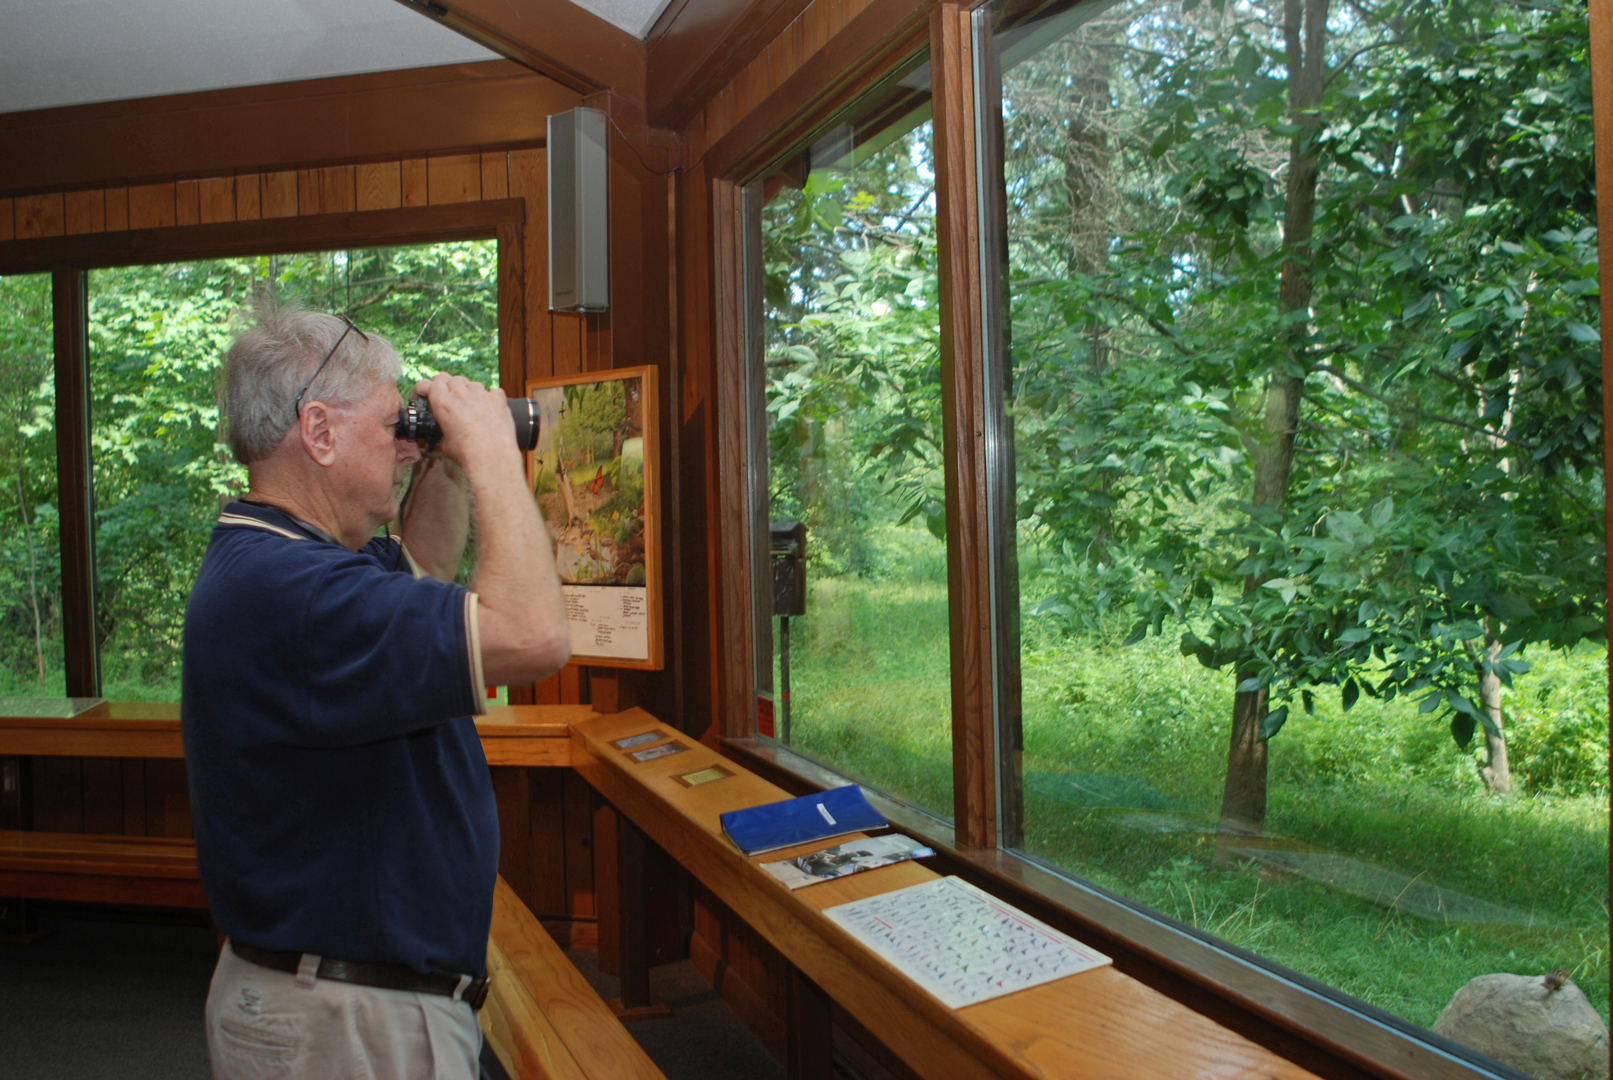 Great views of birds and other wildlife present themselves through the nature center windows at Blacklick Woods. Photo by Bill McCracken.